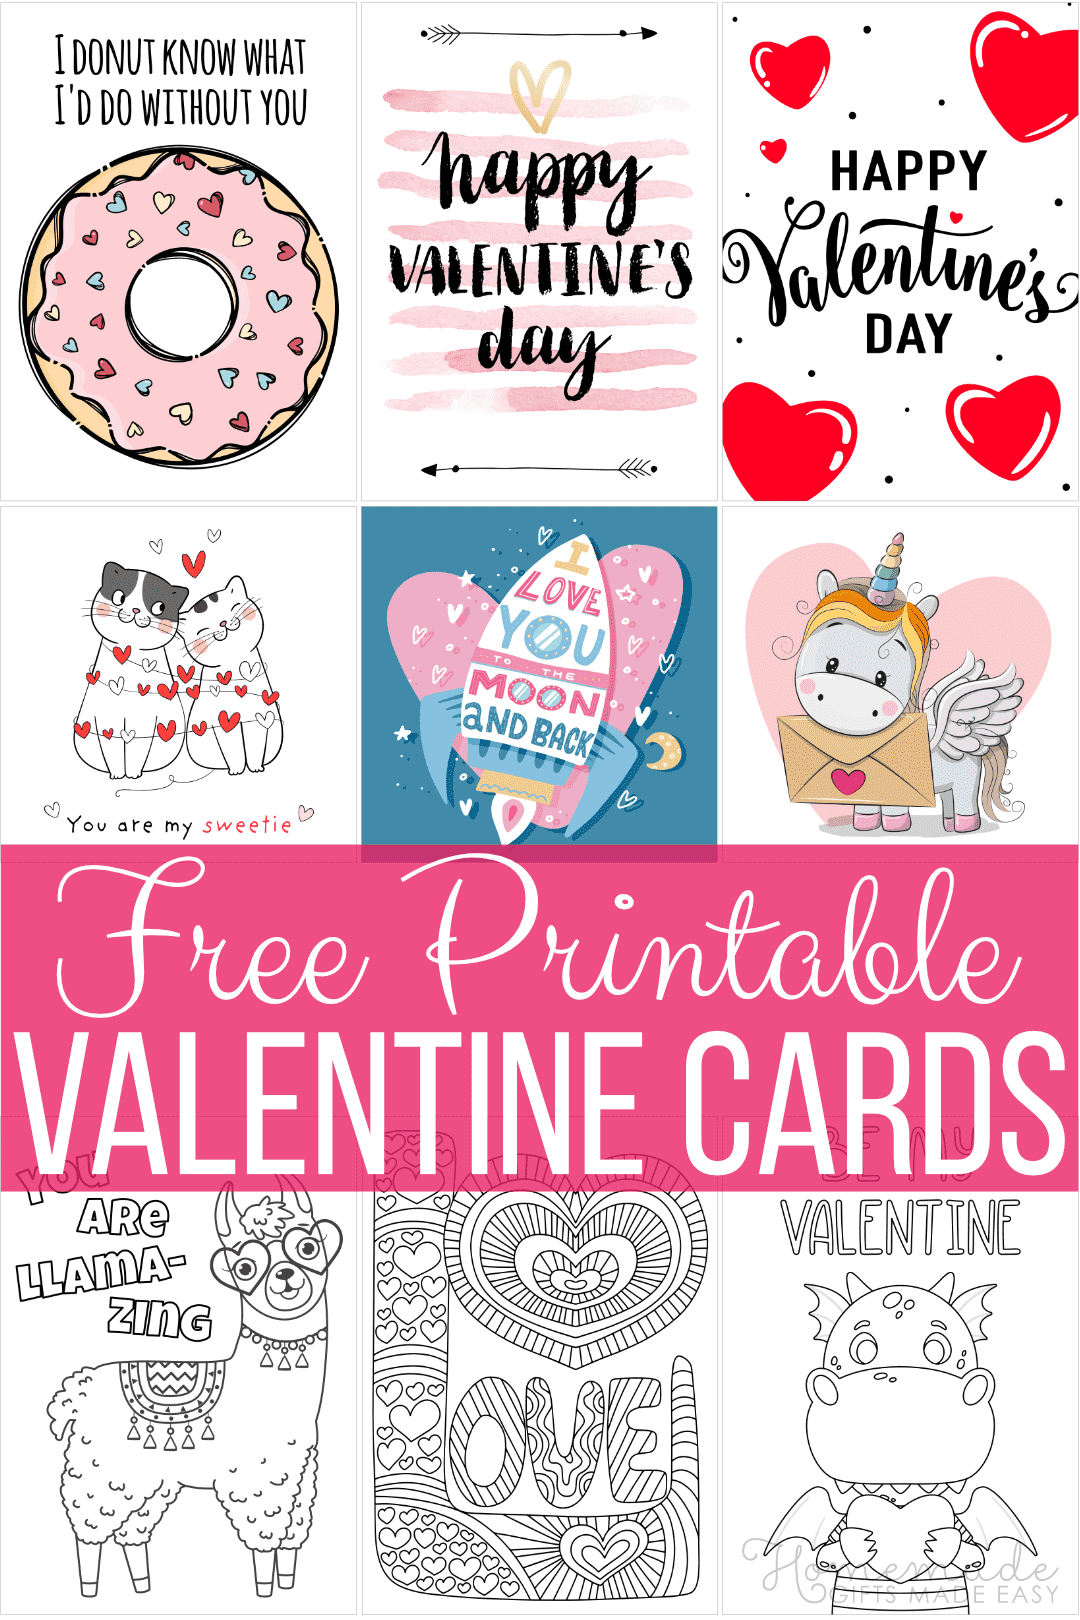 Printable Valentine's Day Card If I had feelings I'd have them for you Easy Instant Download PDF Printable Valentine's Day Card.